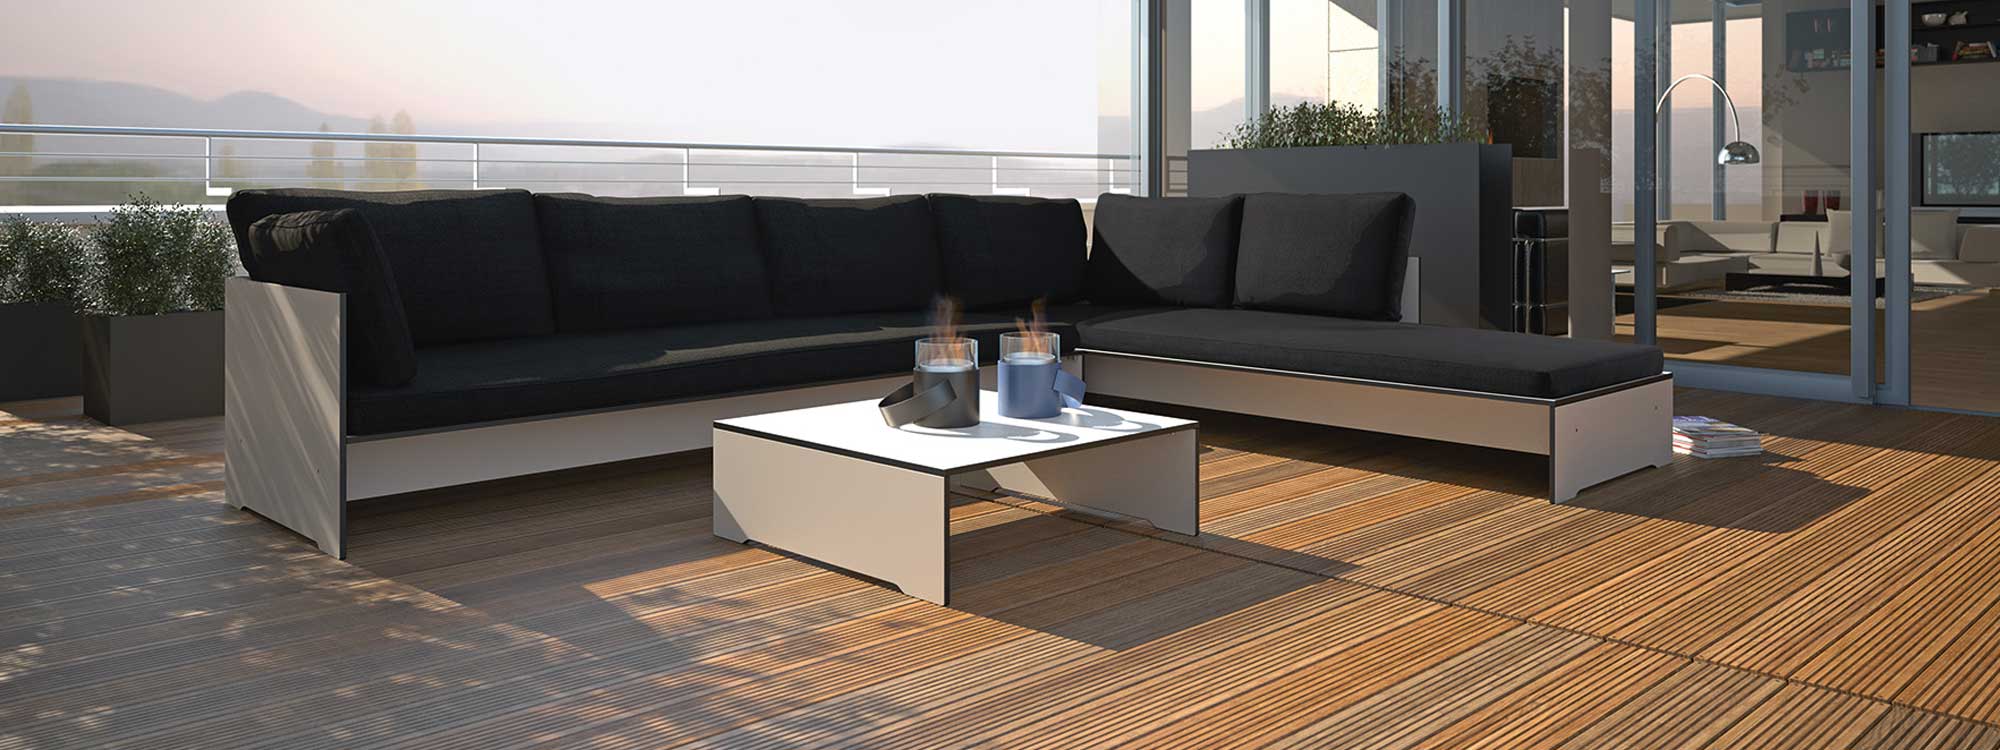 Image of Conmoto Riva white garden corner sofa with anthracite cushions, shown on wooden decking of rooftop terrace